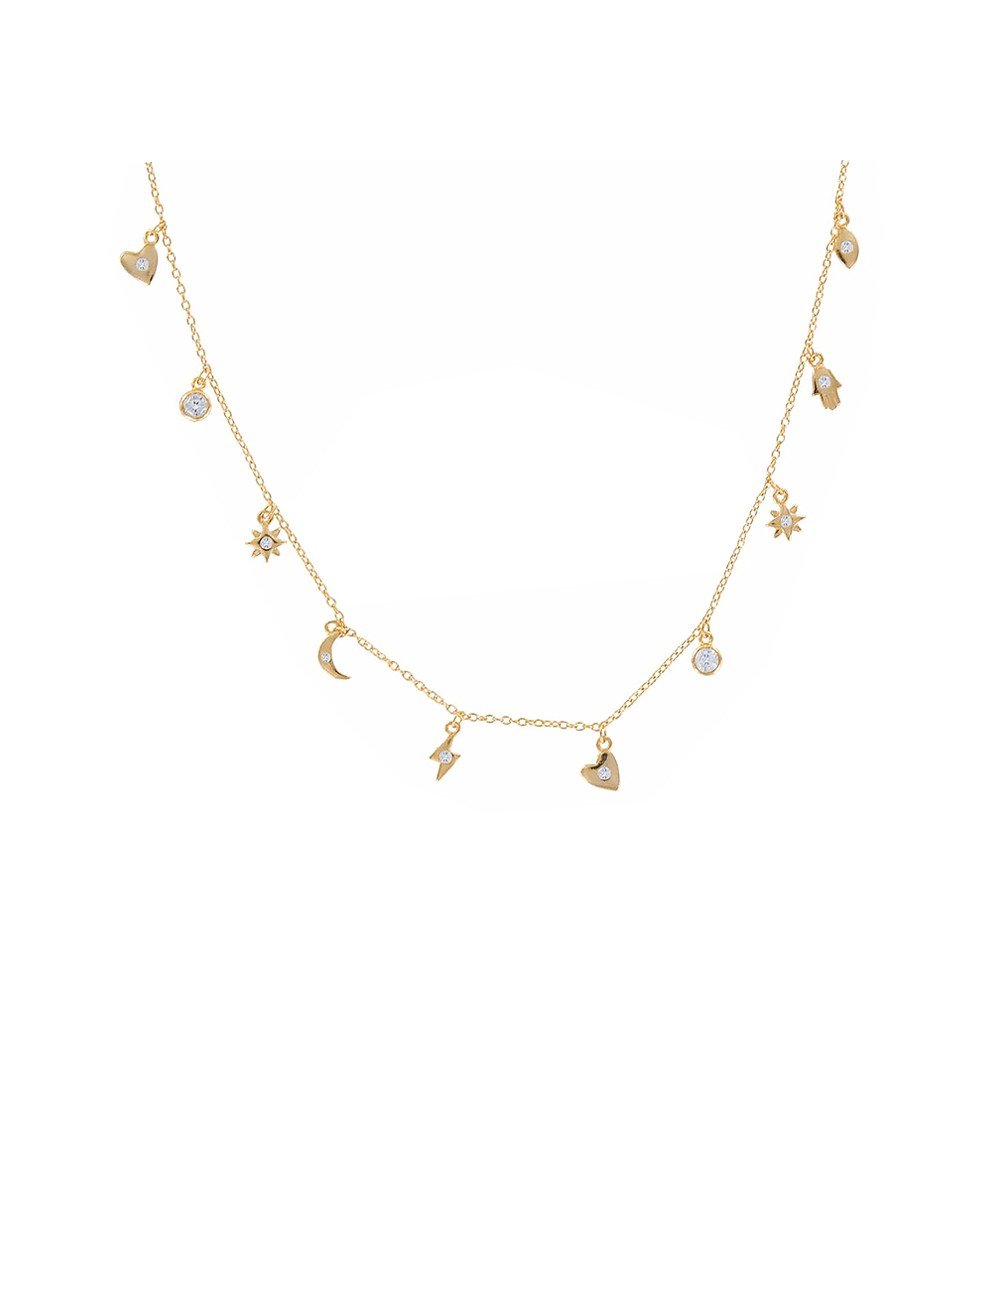 Talisman charm necklace in yellow gold | De Beers US